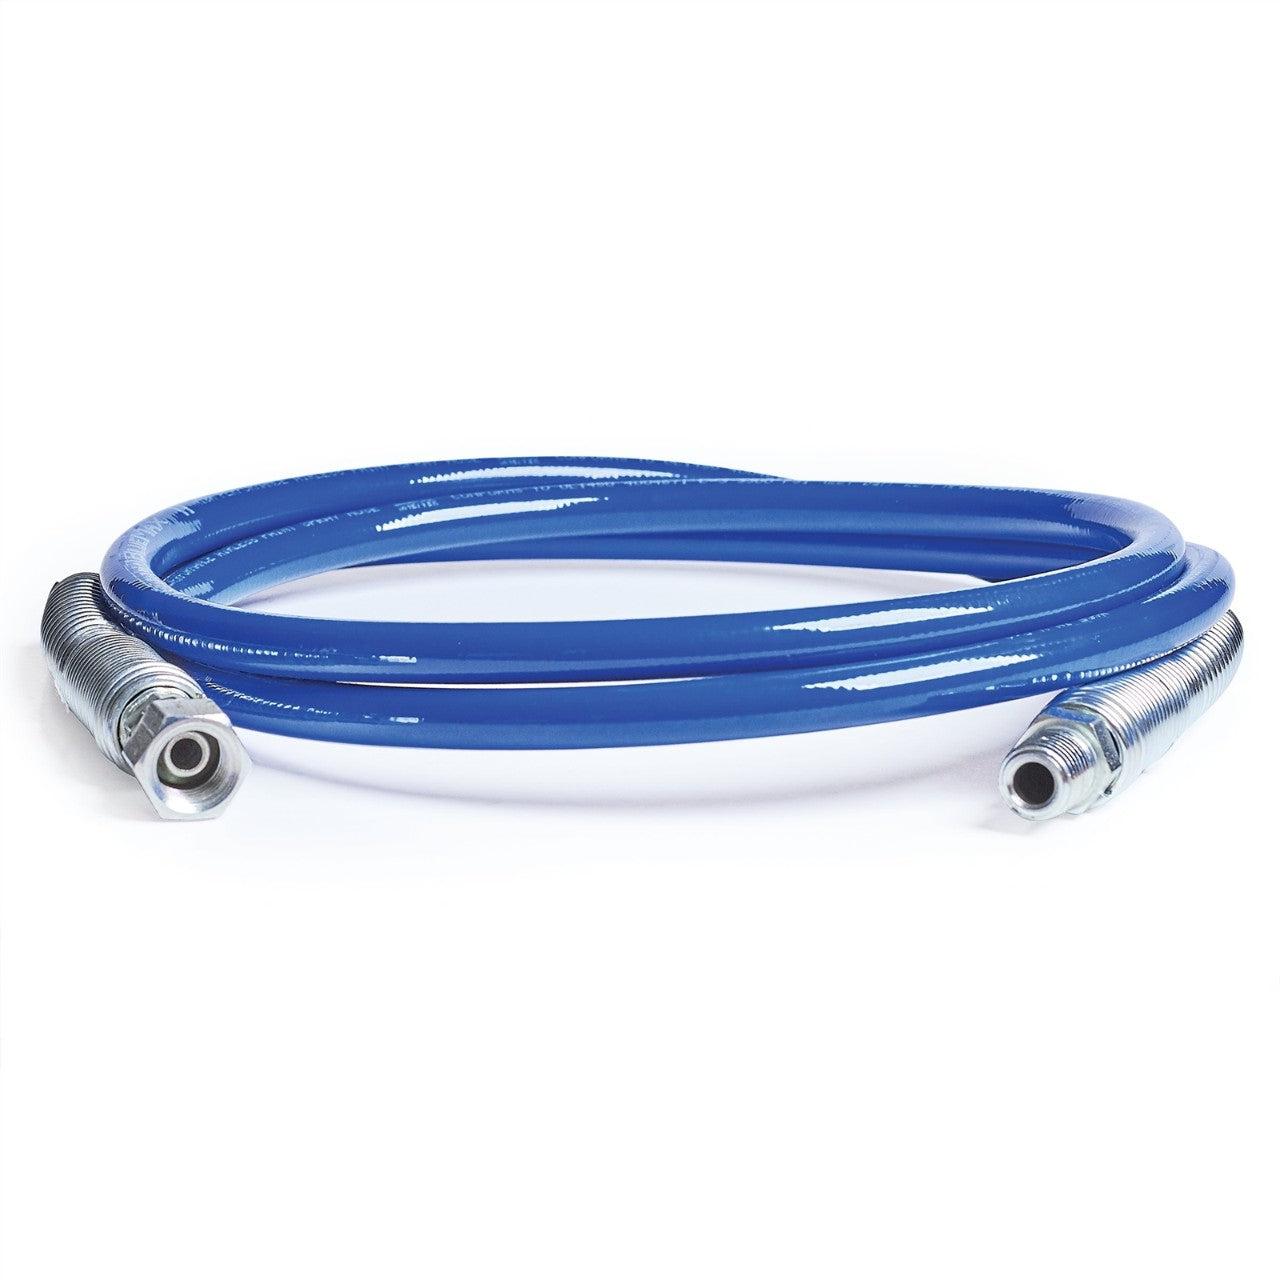 BlueMax II Airless Whip Hose, 3/16 in x 6 ft (1.8 m)